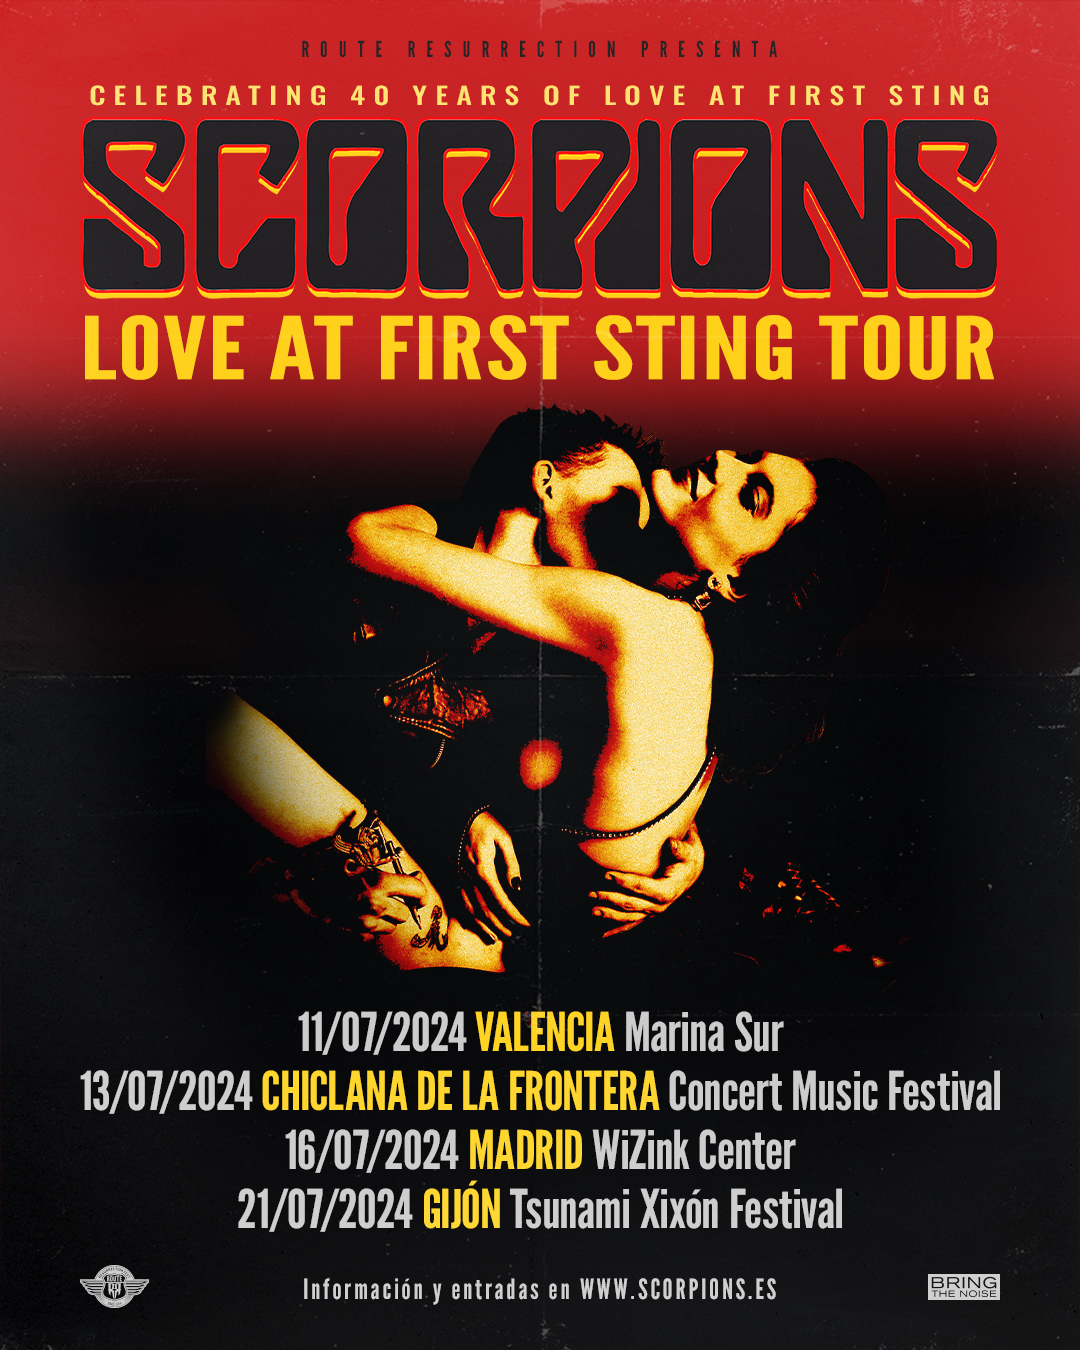 Scorpions: Celebrating 40 years of Love at First Sting Tour